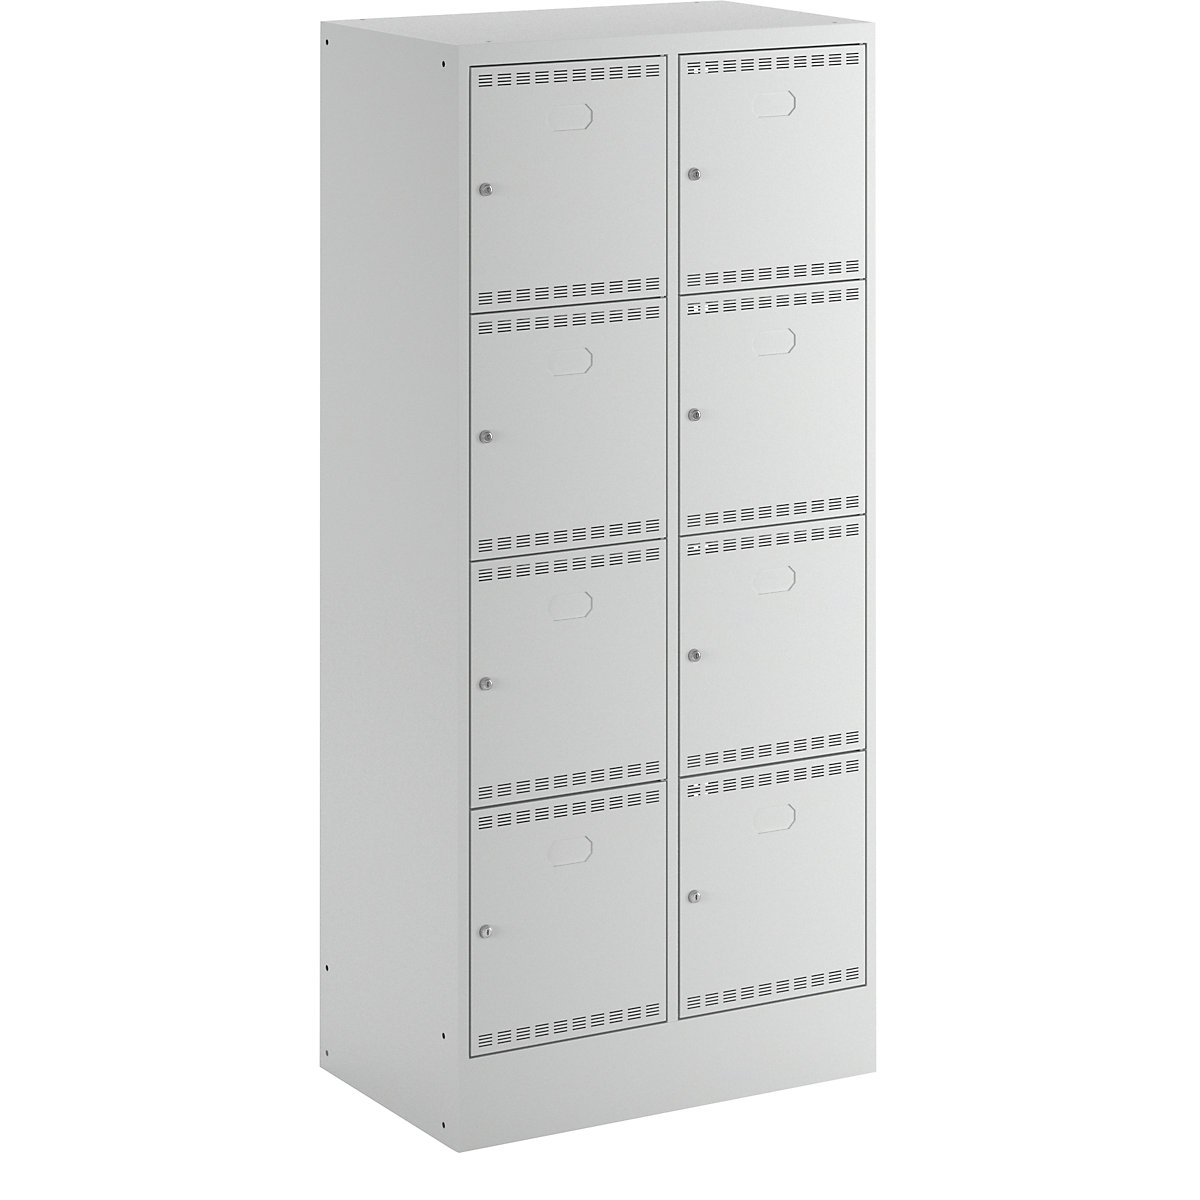 Battery charging cabinet with lockable compartments – LISTA, with 2 x 4 compartments, 1 x 230 V, 1 x USB, grey-12